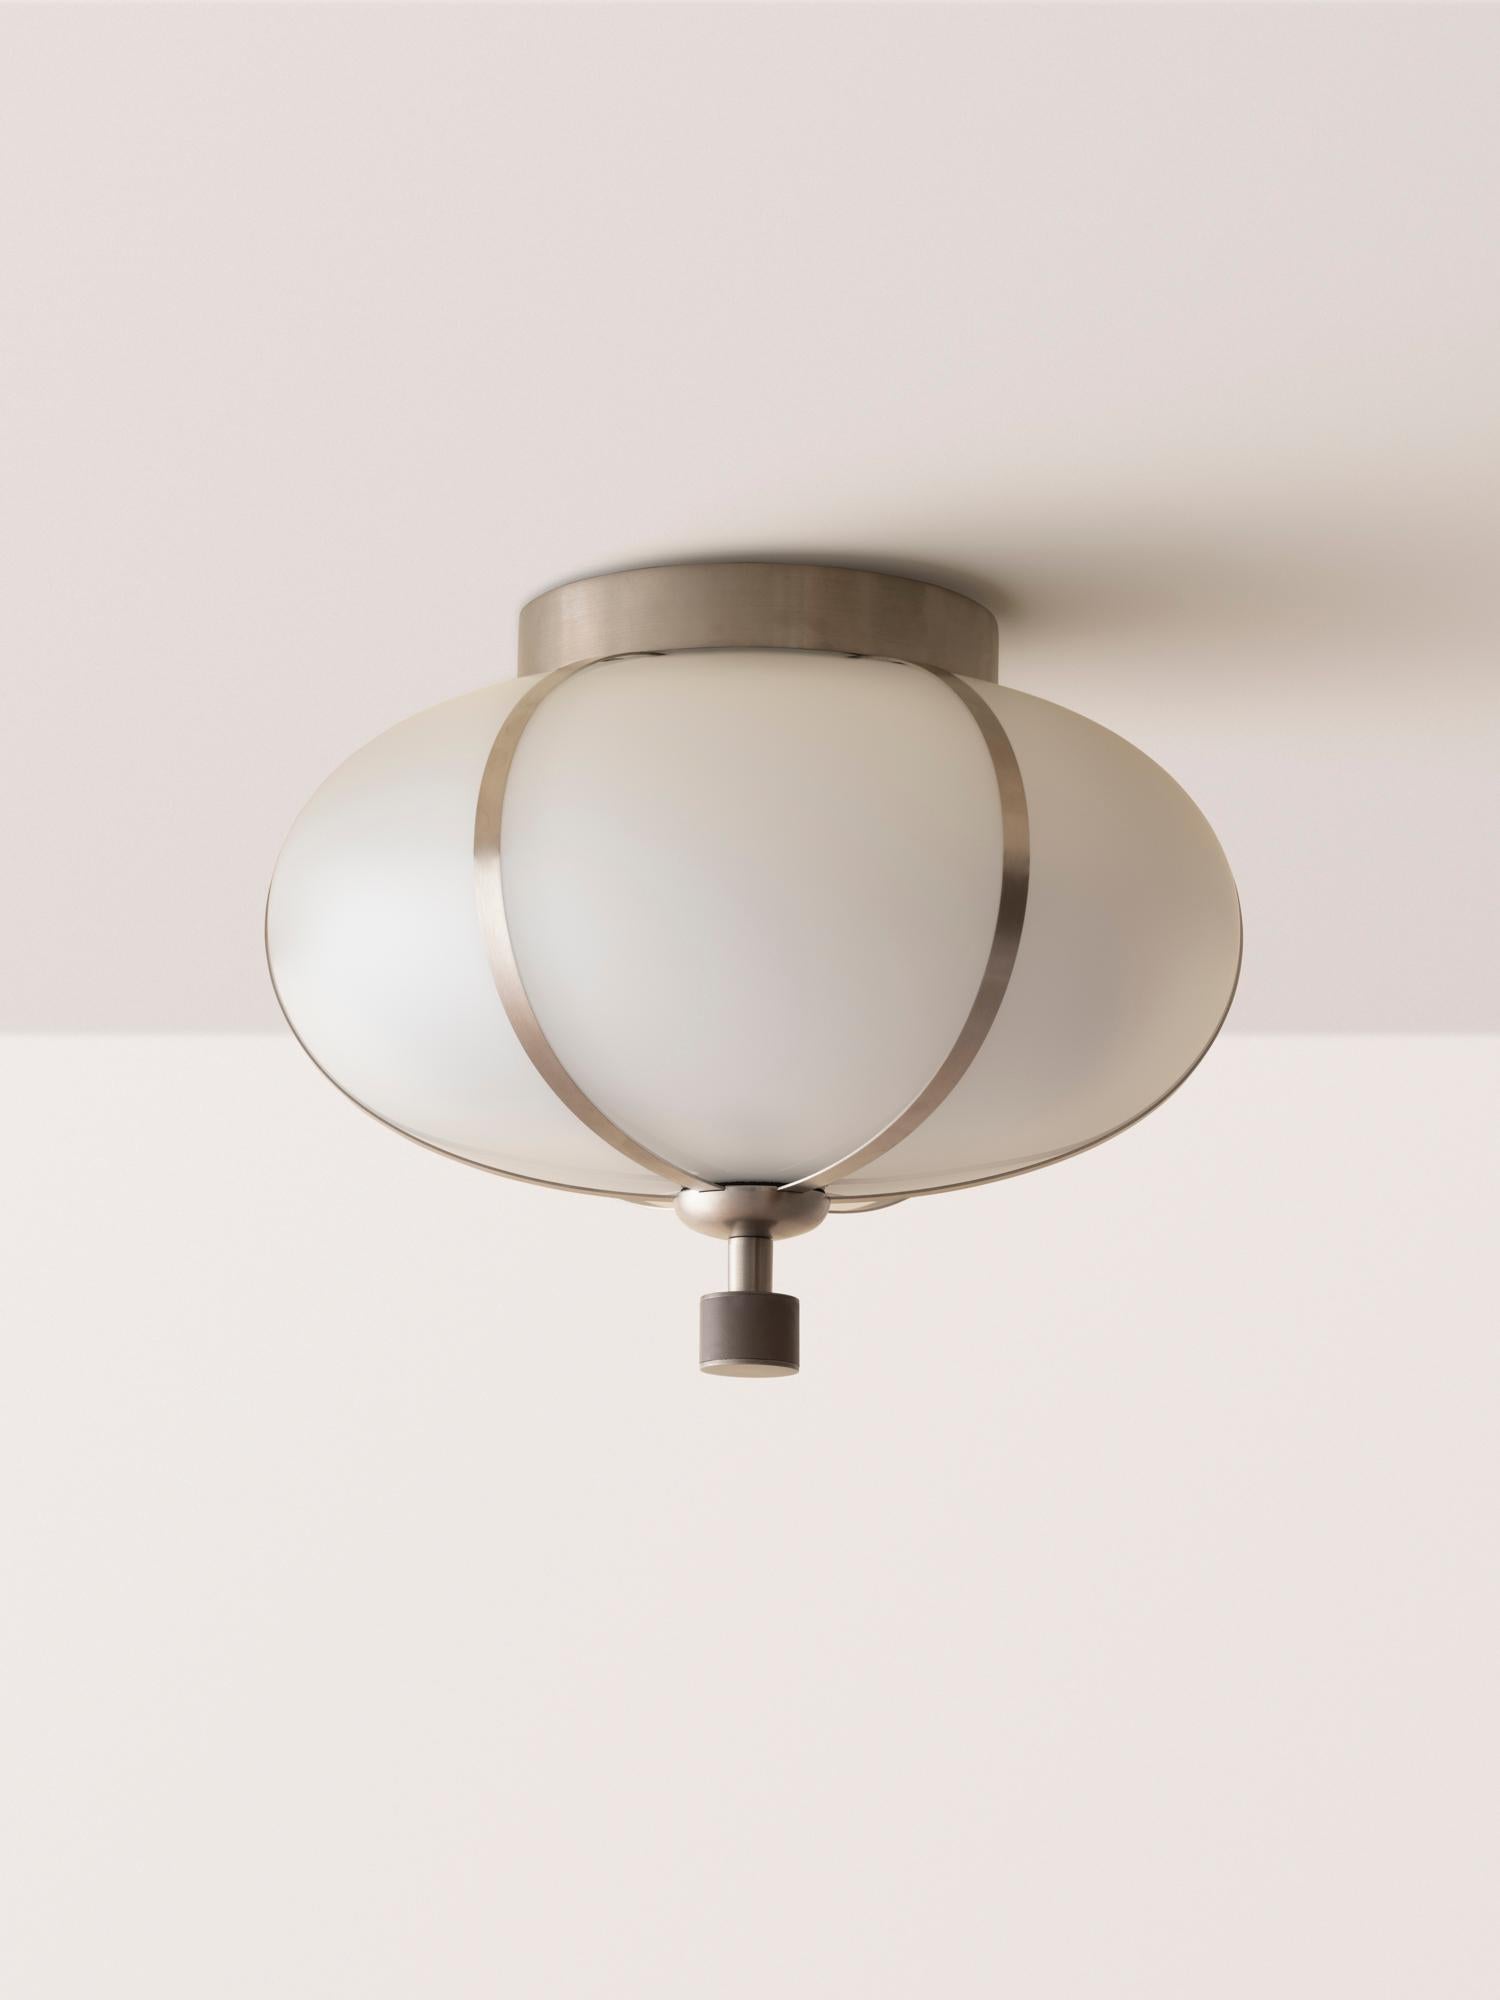 The Rib Flush Mount - Small Ellipse is blown in Italy and delicately framed by thin brass ribs. A cylindrical brass finial, with optional hand-wrapped leather or suede, elongates the fixture and adds a finishing touch of refinement.

This listing is